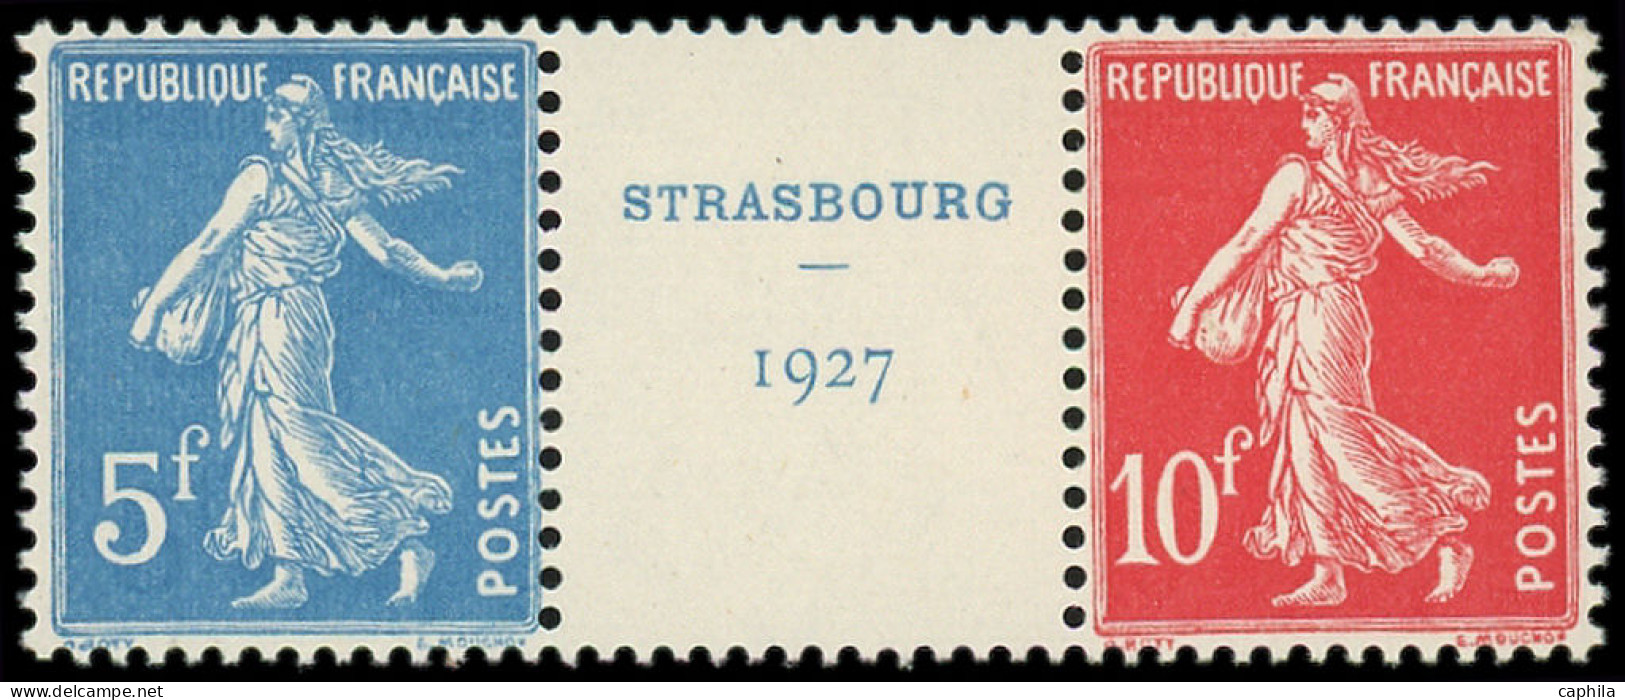 ** FRANCE - Poste - 242A, Paire Avec Intervalle: Expo Strasbourg 1927 - Unused Stamps